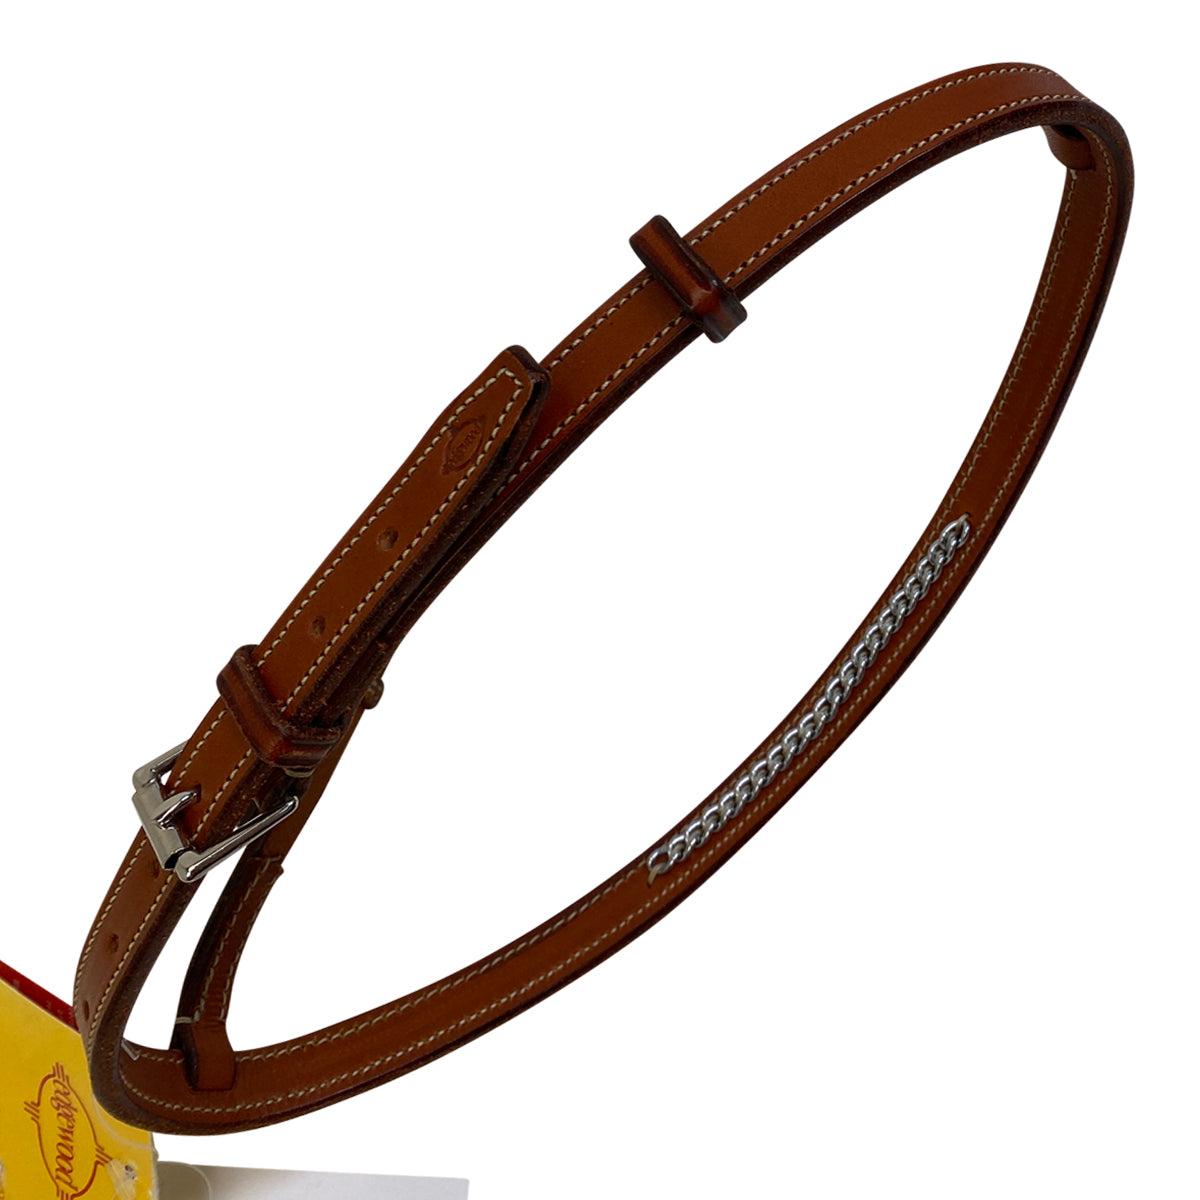 Edgewood Raised Fancy Stitched Chain Noseband Cavesson in Newmarket